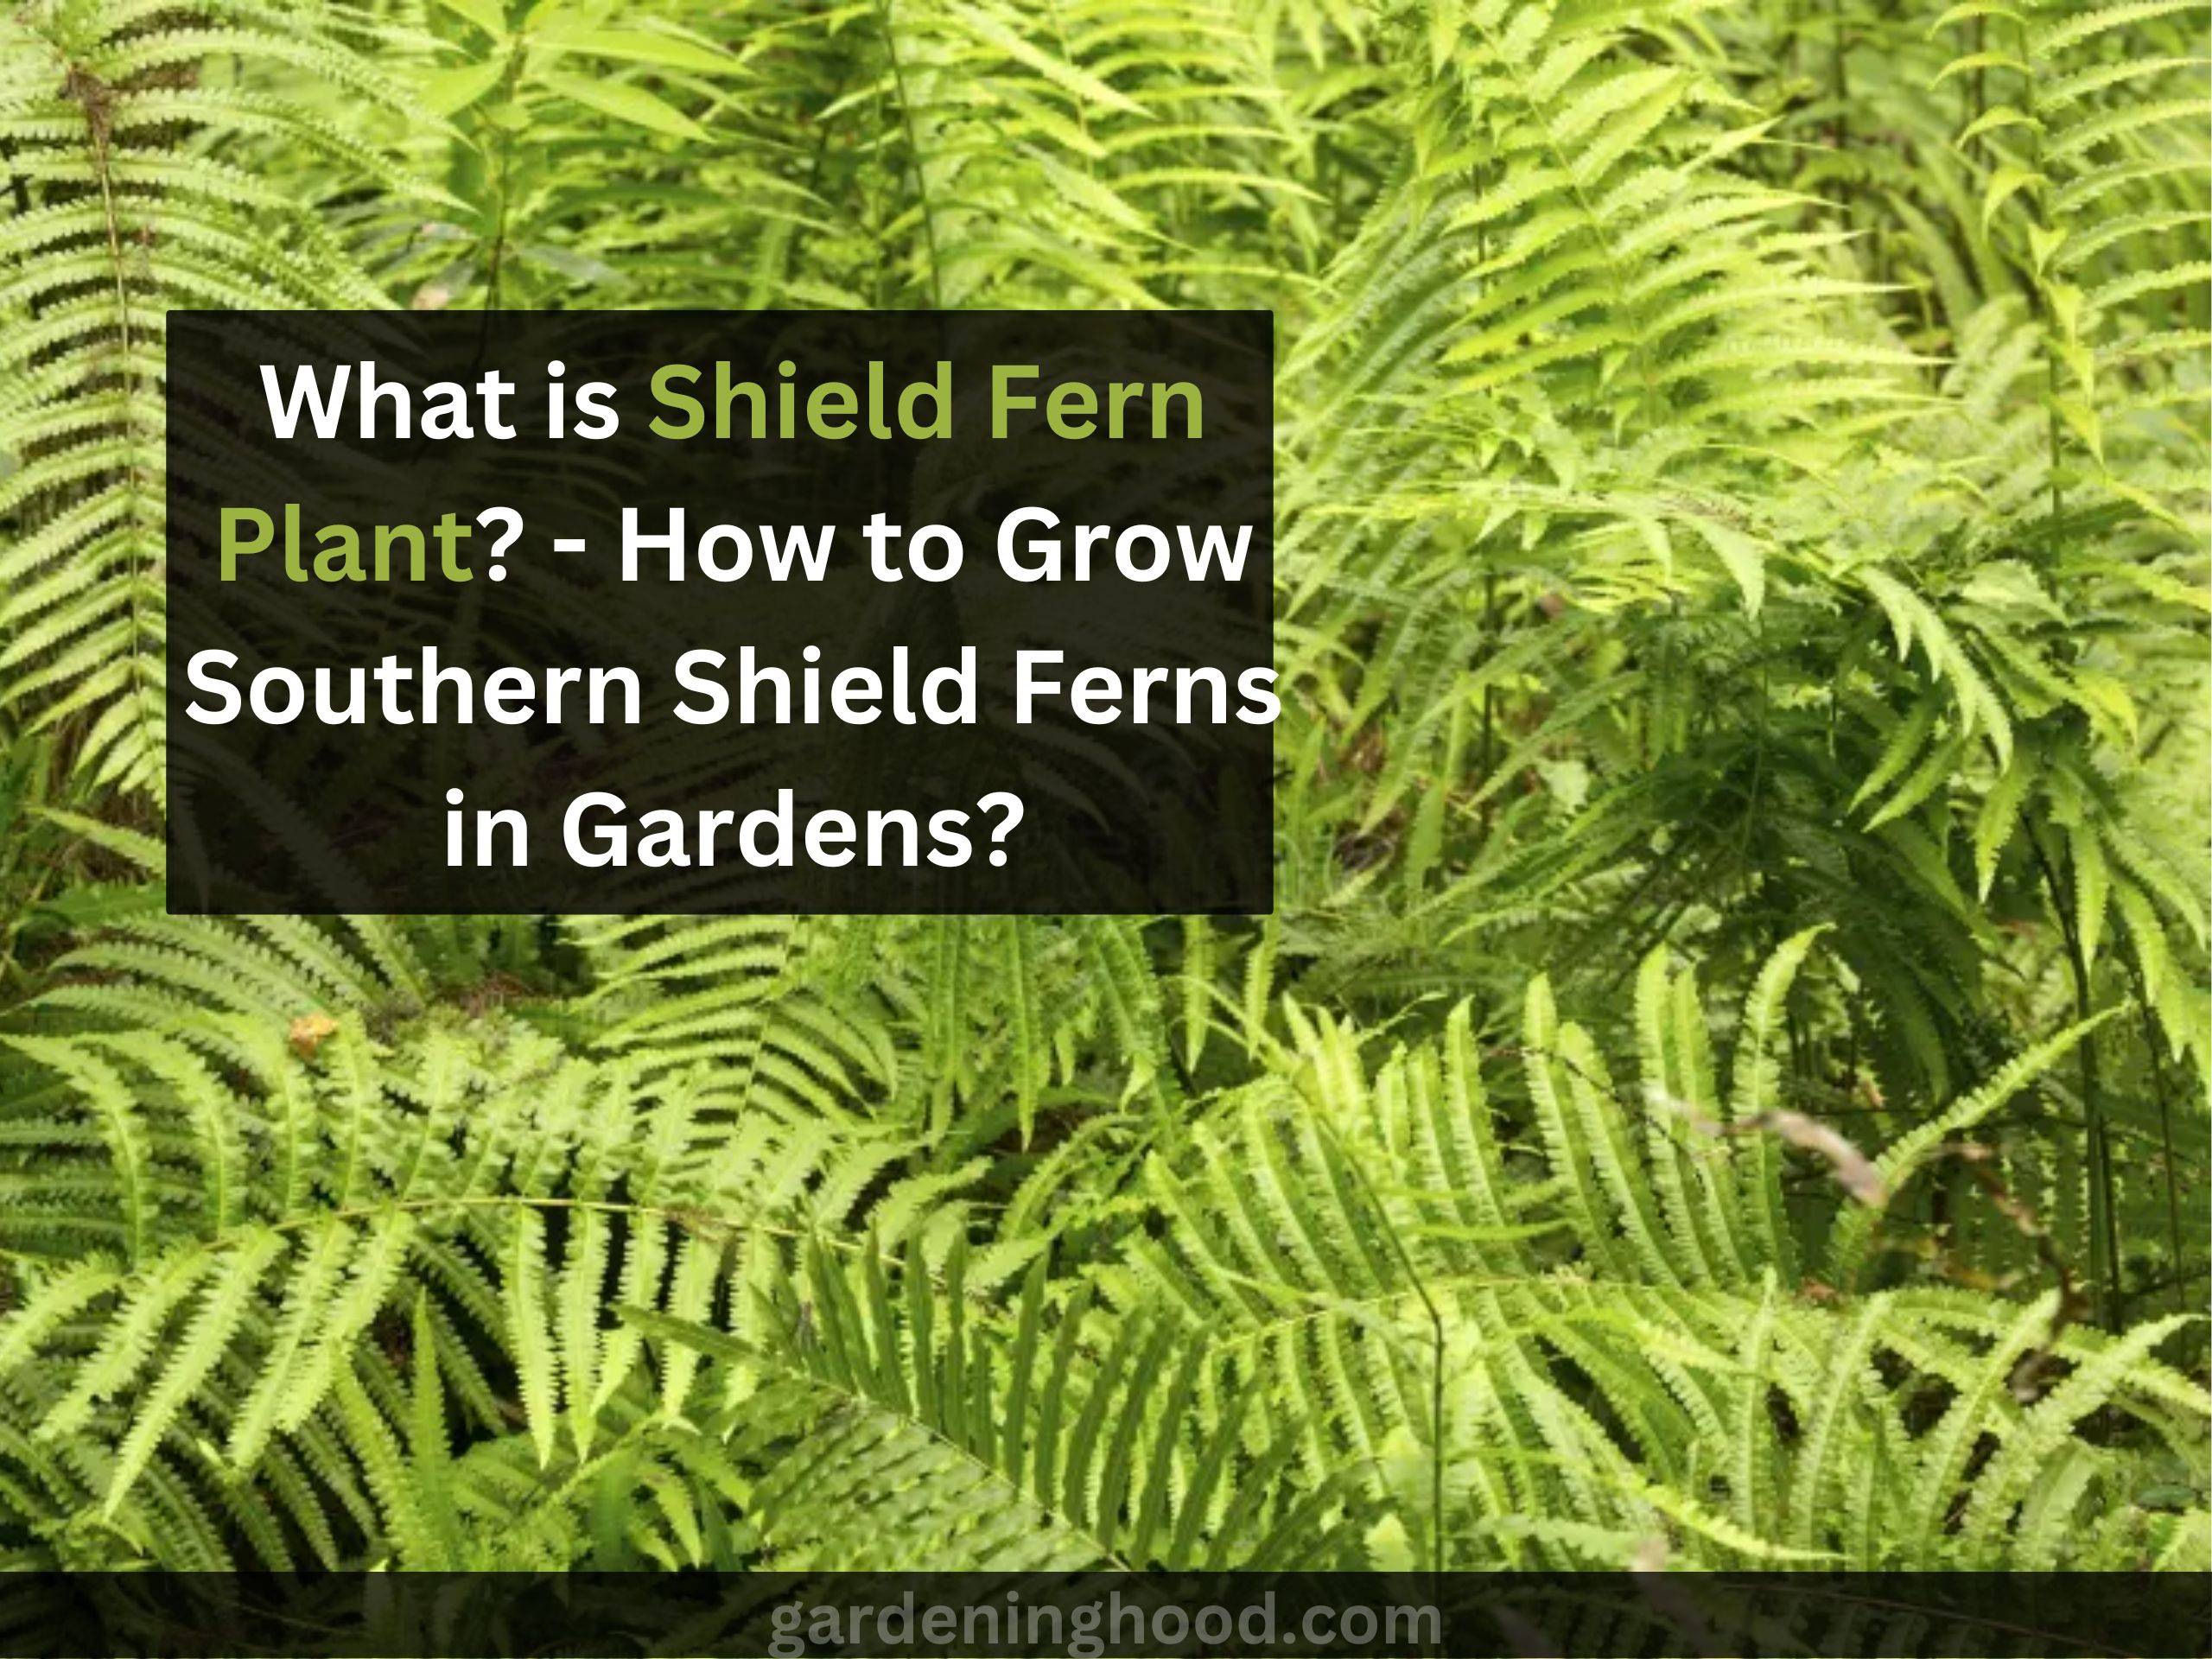 What is Shield Fern Plant? - How to Grow Southern Shield Ferns in Gardens?